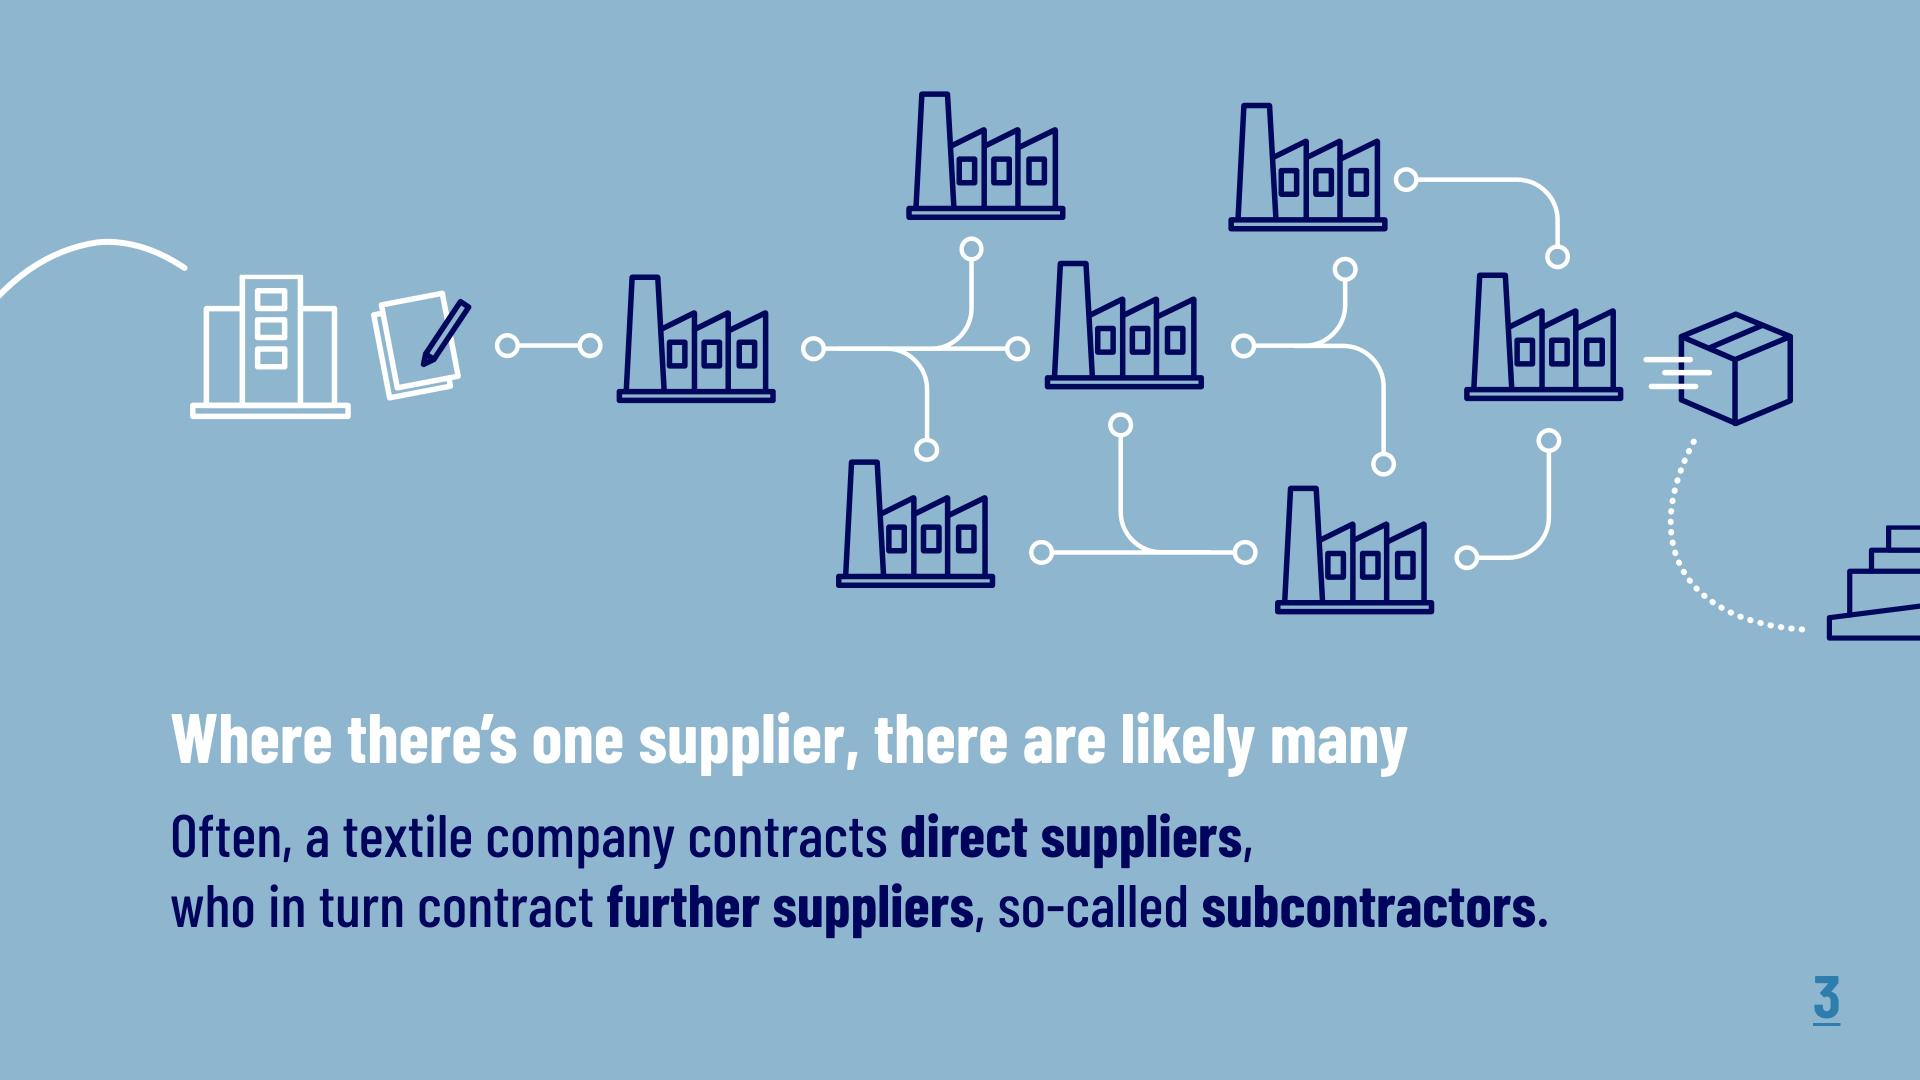 Where there's one supplier, there are likely many: Often a textile company contracts direct suppliers, who in turn contract further suppliers, so-called subcontractors. 